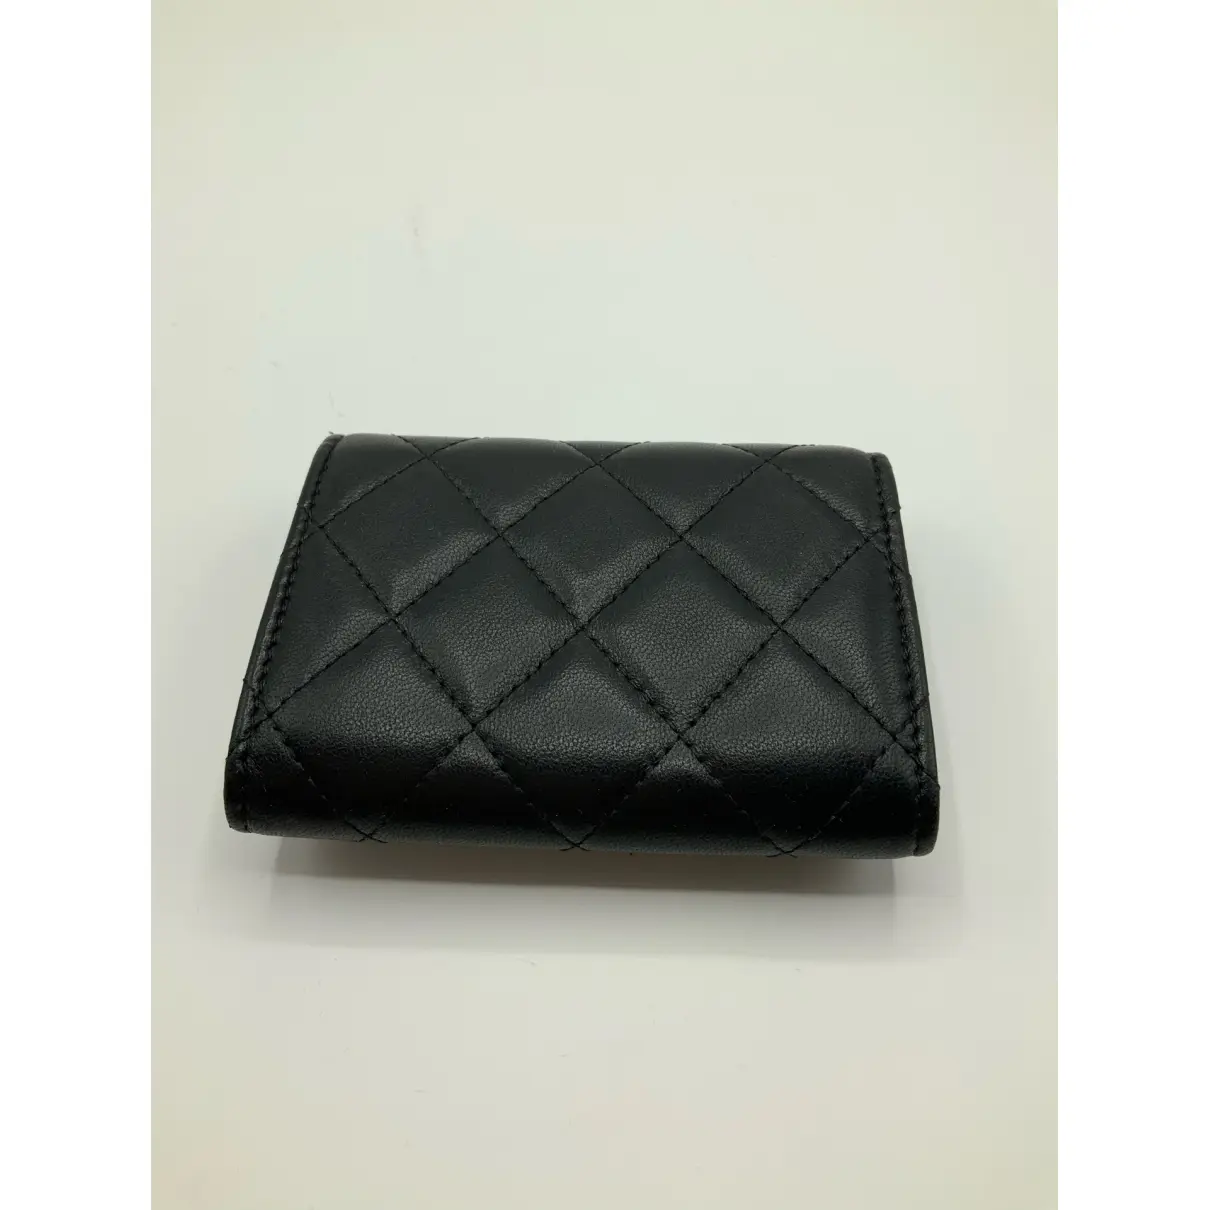 Buy Chanel Timeless/Classique leather card wallet online